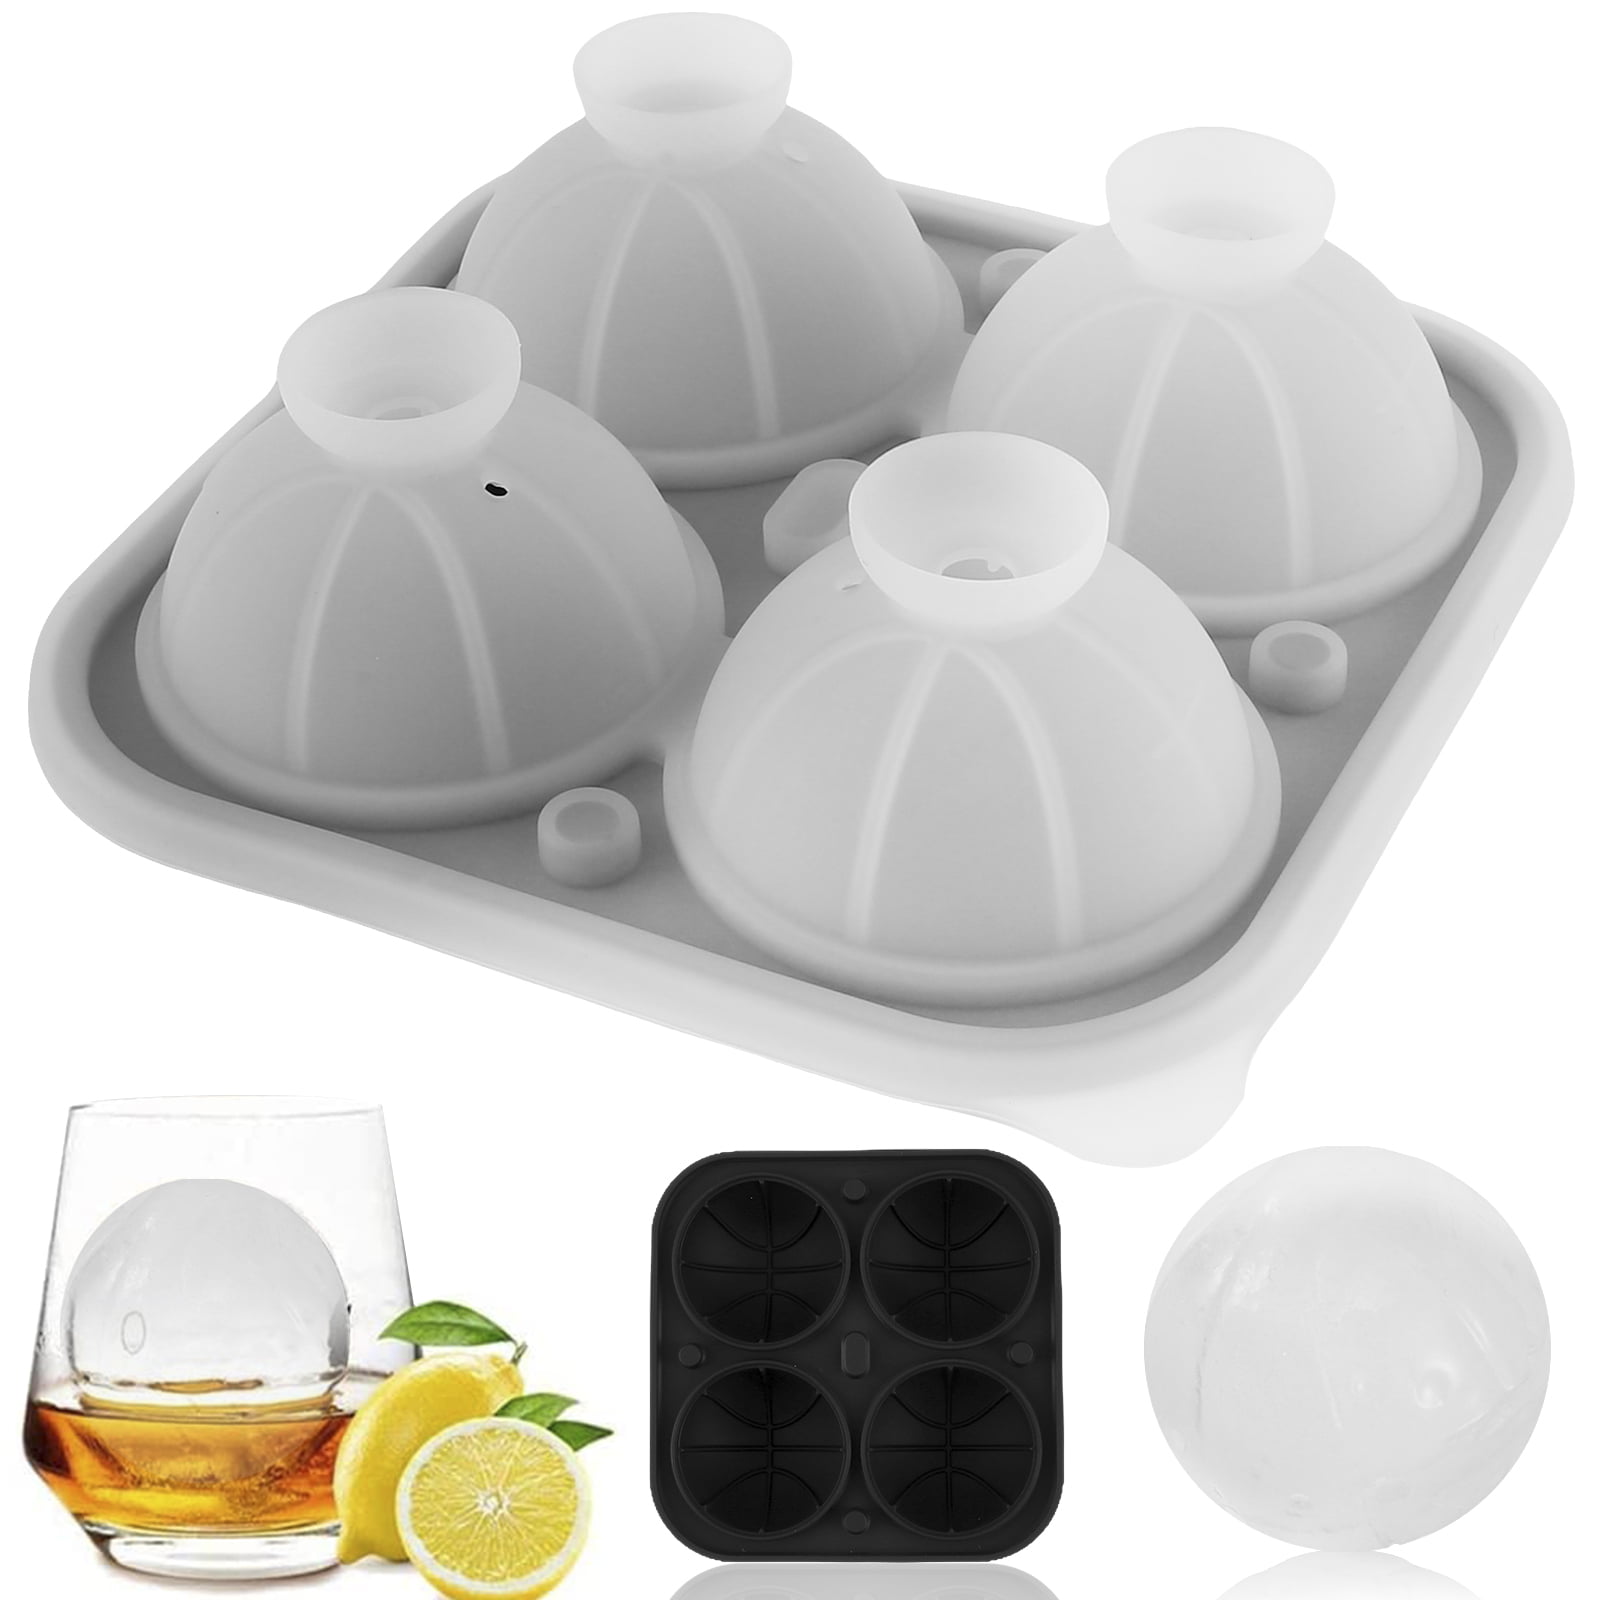 Kernelly 4pcs Sphere Ice Molds - 3 inch Large Ice Balls,Food Grade Silicone Ice Mold,DIY Ice Grid Spherical Ice Cubes Maker,Ice Box,Make Ice Ball for Whiskey